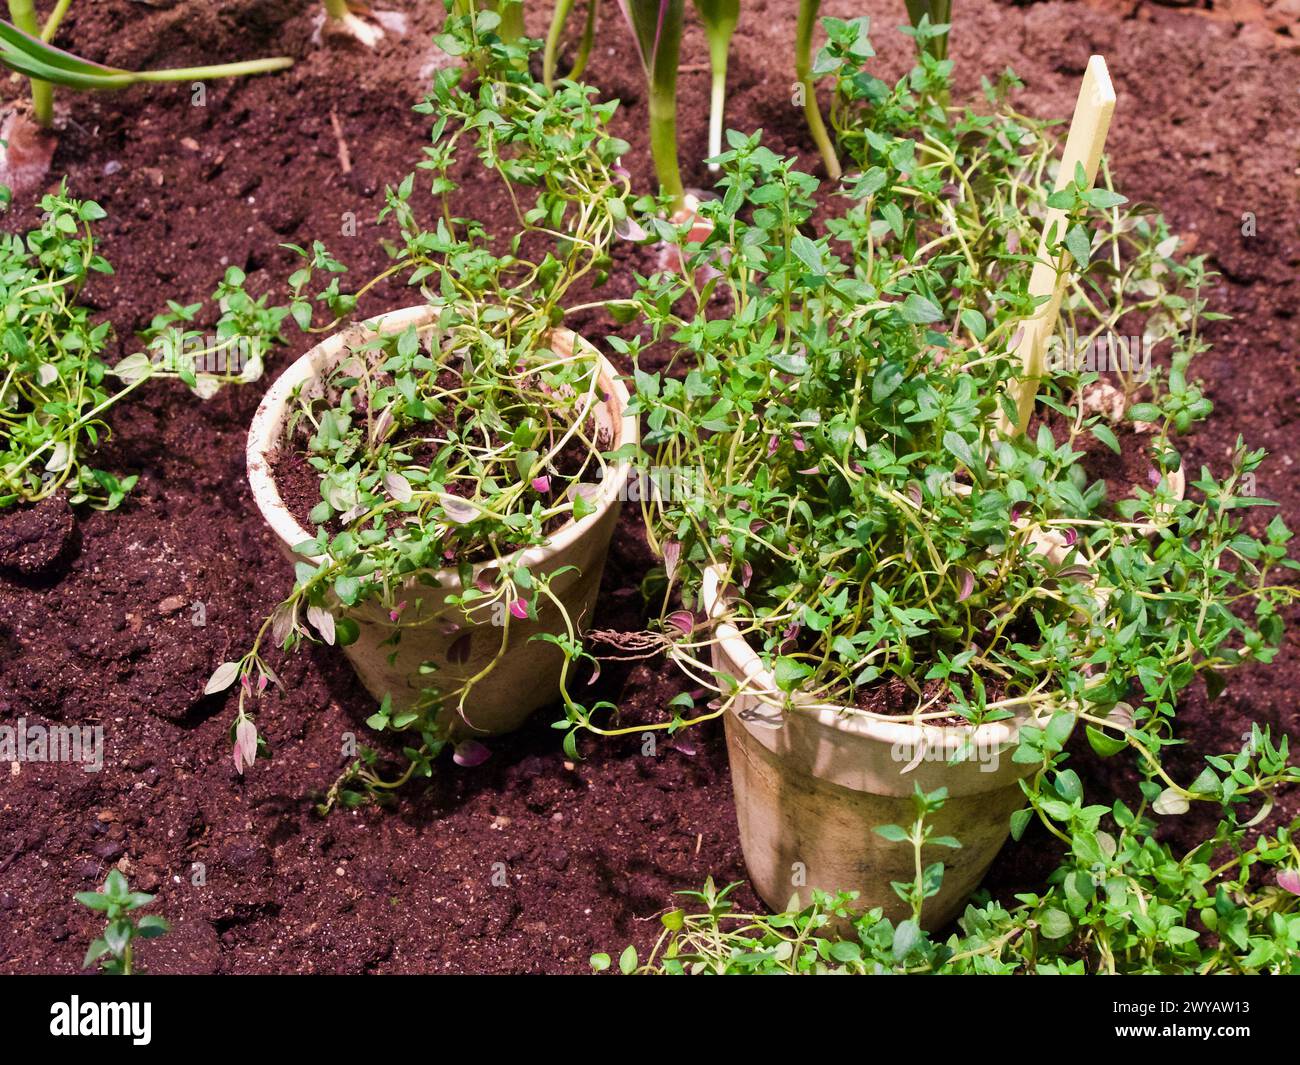 Small clay pots with thyme plants to be planted in the vegetable patch in the garden. Stock Photo